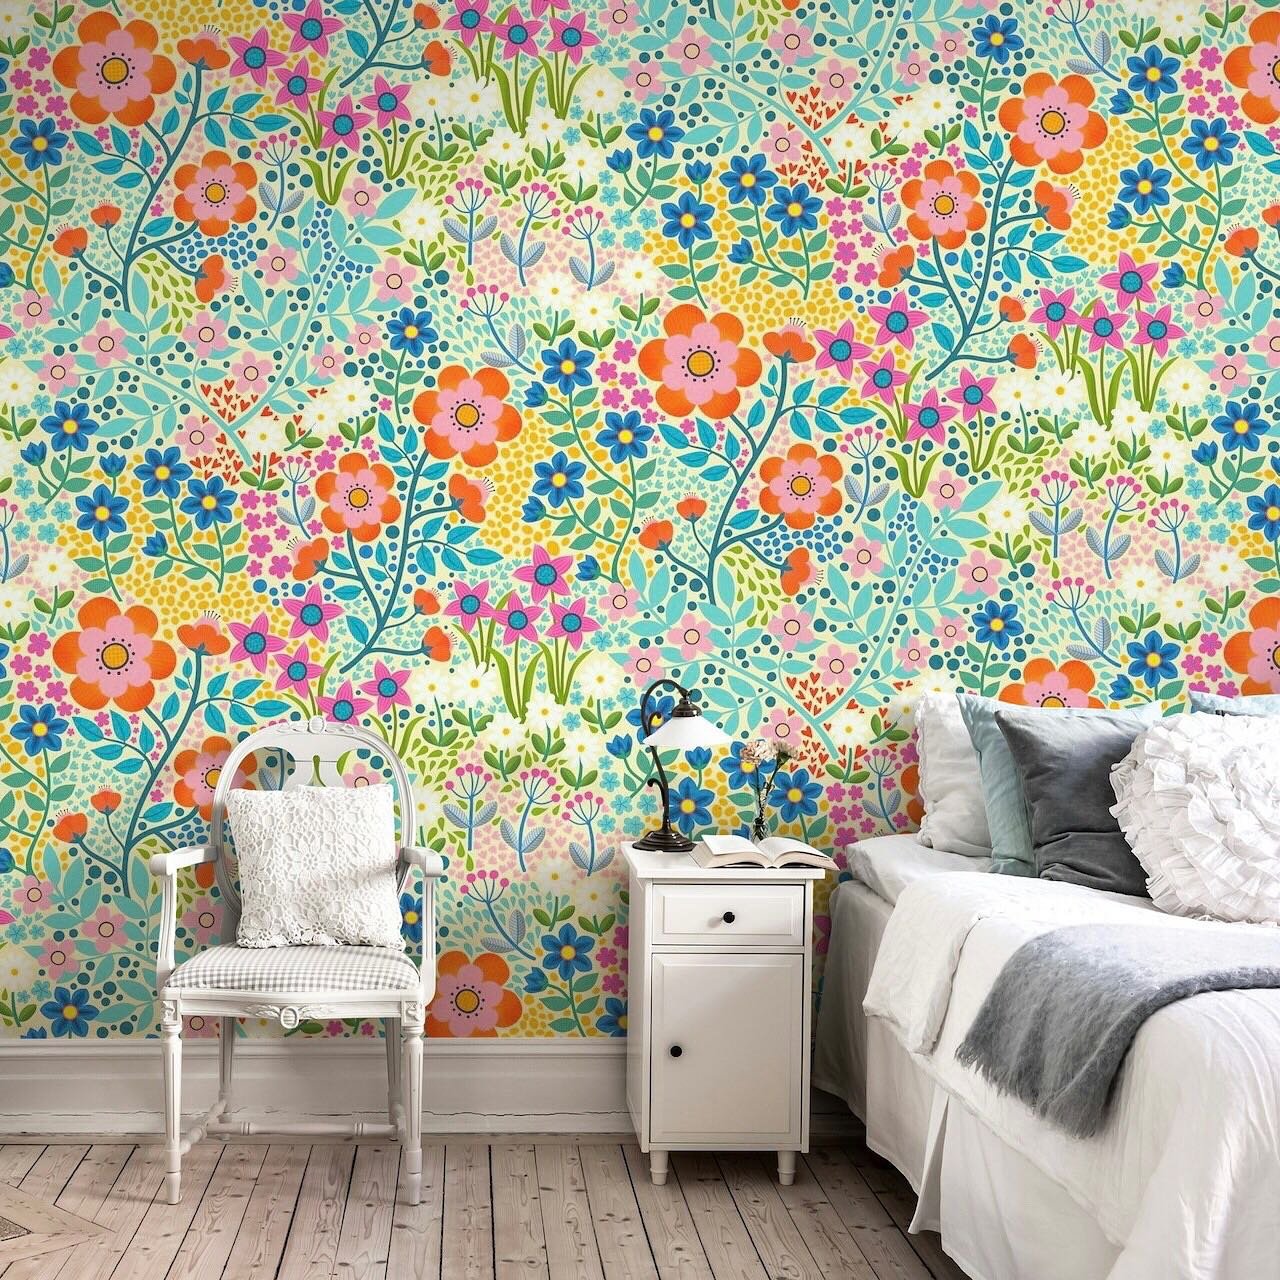 I&rsquo;m super excited to announce my new wallpaper range with the Swedish company Happy Wall ~ https://www.happywall.com/en/designers/cecca-designs

I&rsquo;ve started adding my favourite wallpaper designs but please let me know if there are any yo